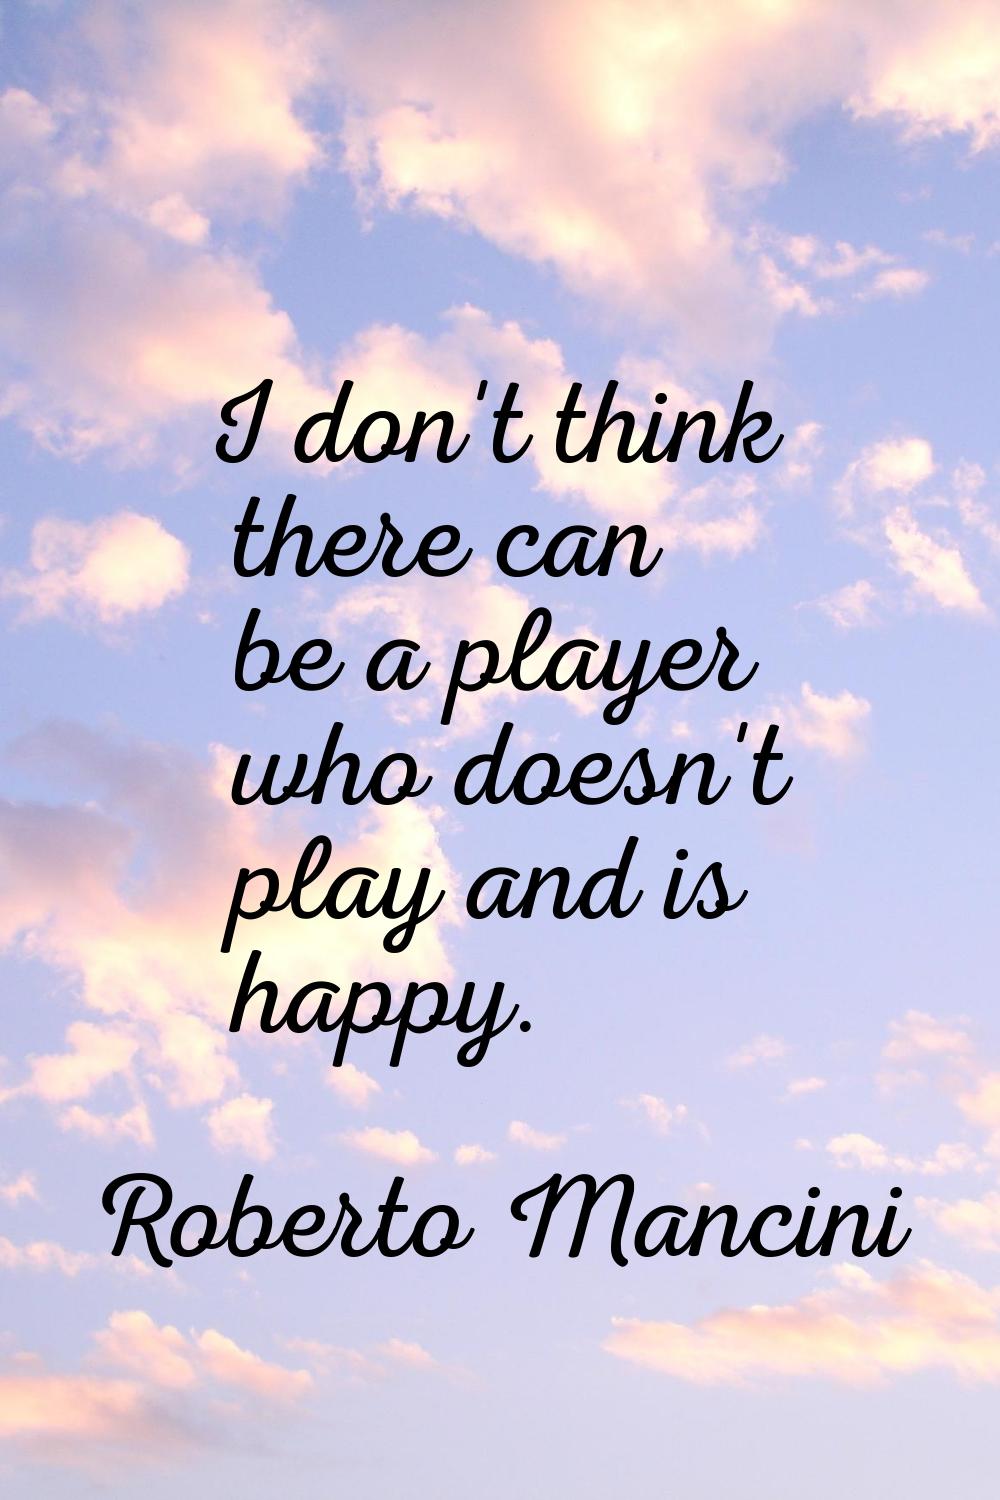 I don't think there can be a player who doesn't play and is happy.